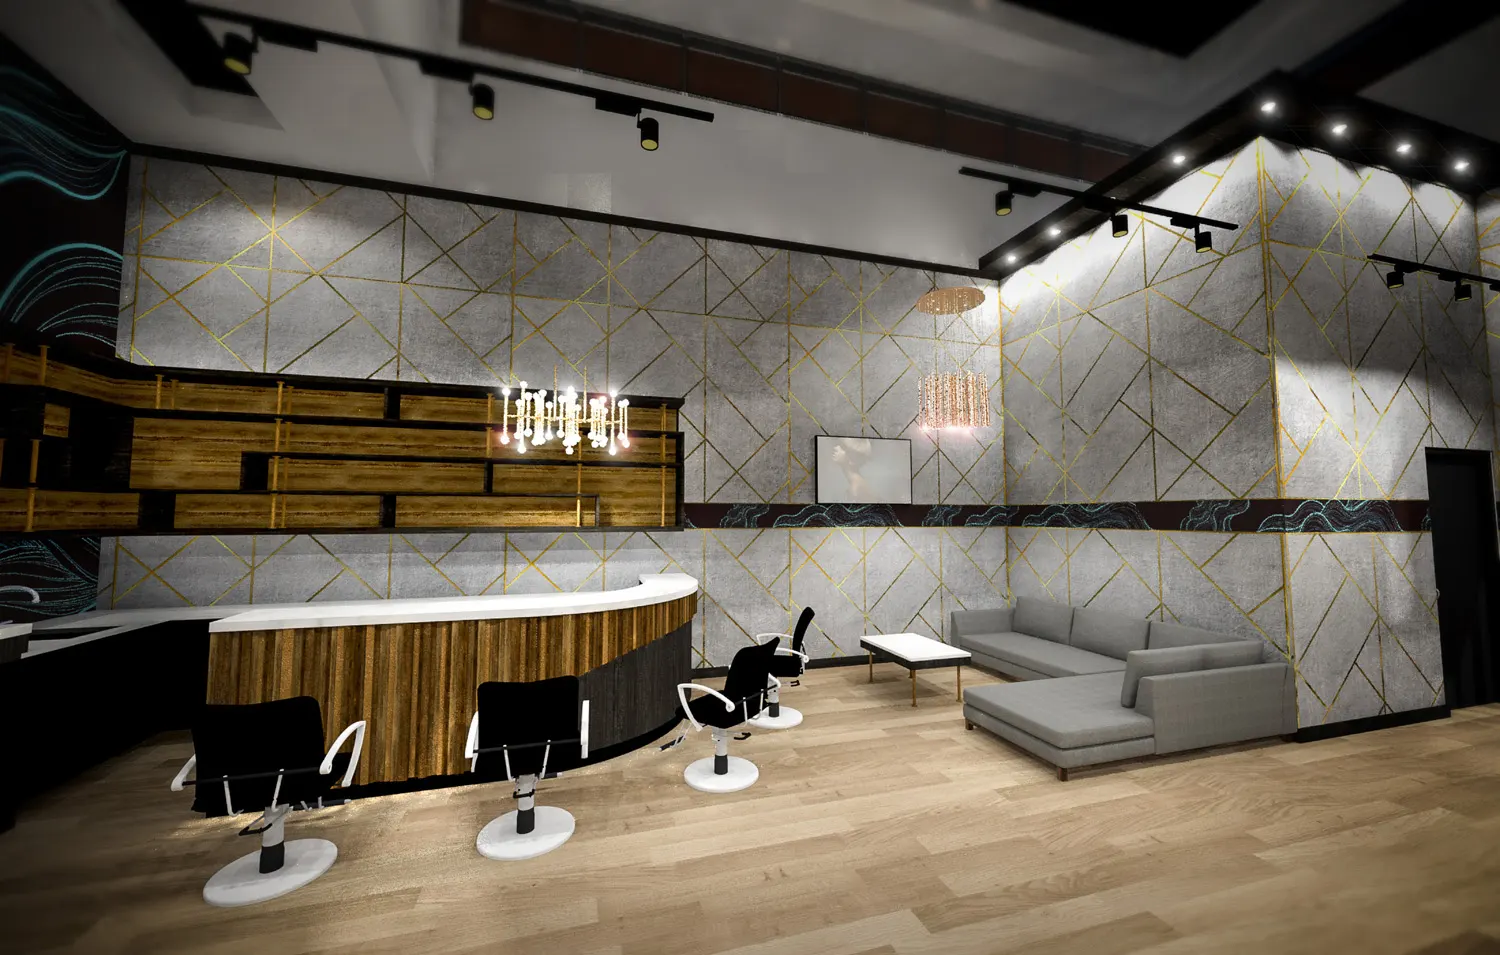 Interior design project for Hair + Co. Inc. Designed 3D rendering to create a comfortable environment for the customers